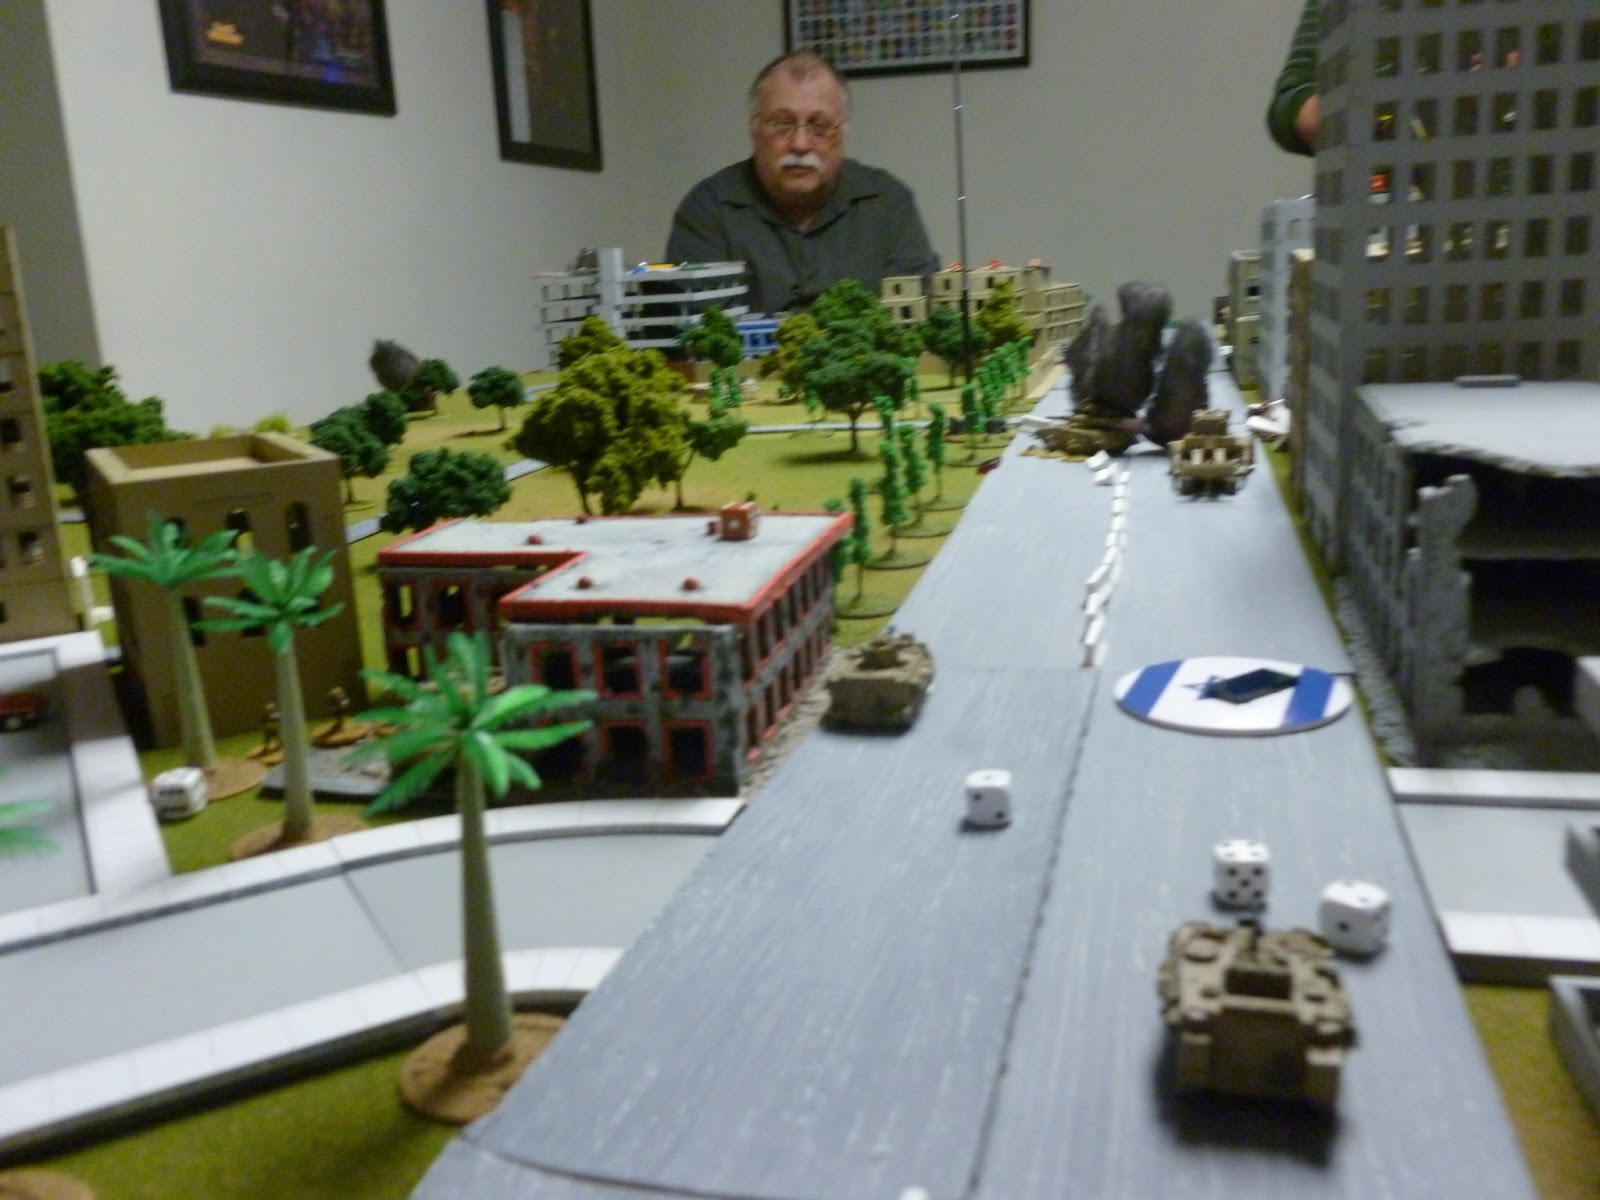  Old Sarge contemplating the mayhem from the PLO end of the table.&nbsp;  A couple more RPG hits and the 'dozer will surely block the opening it just made in the barricade. 